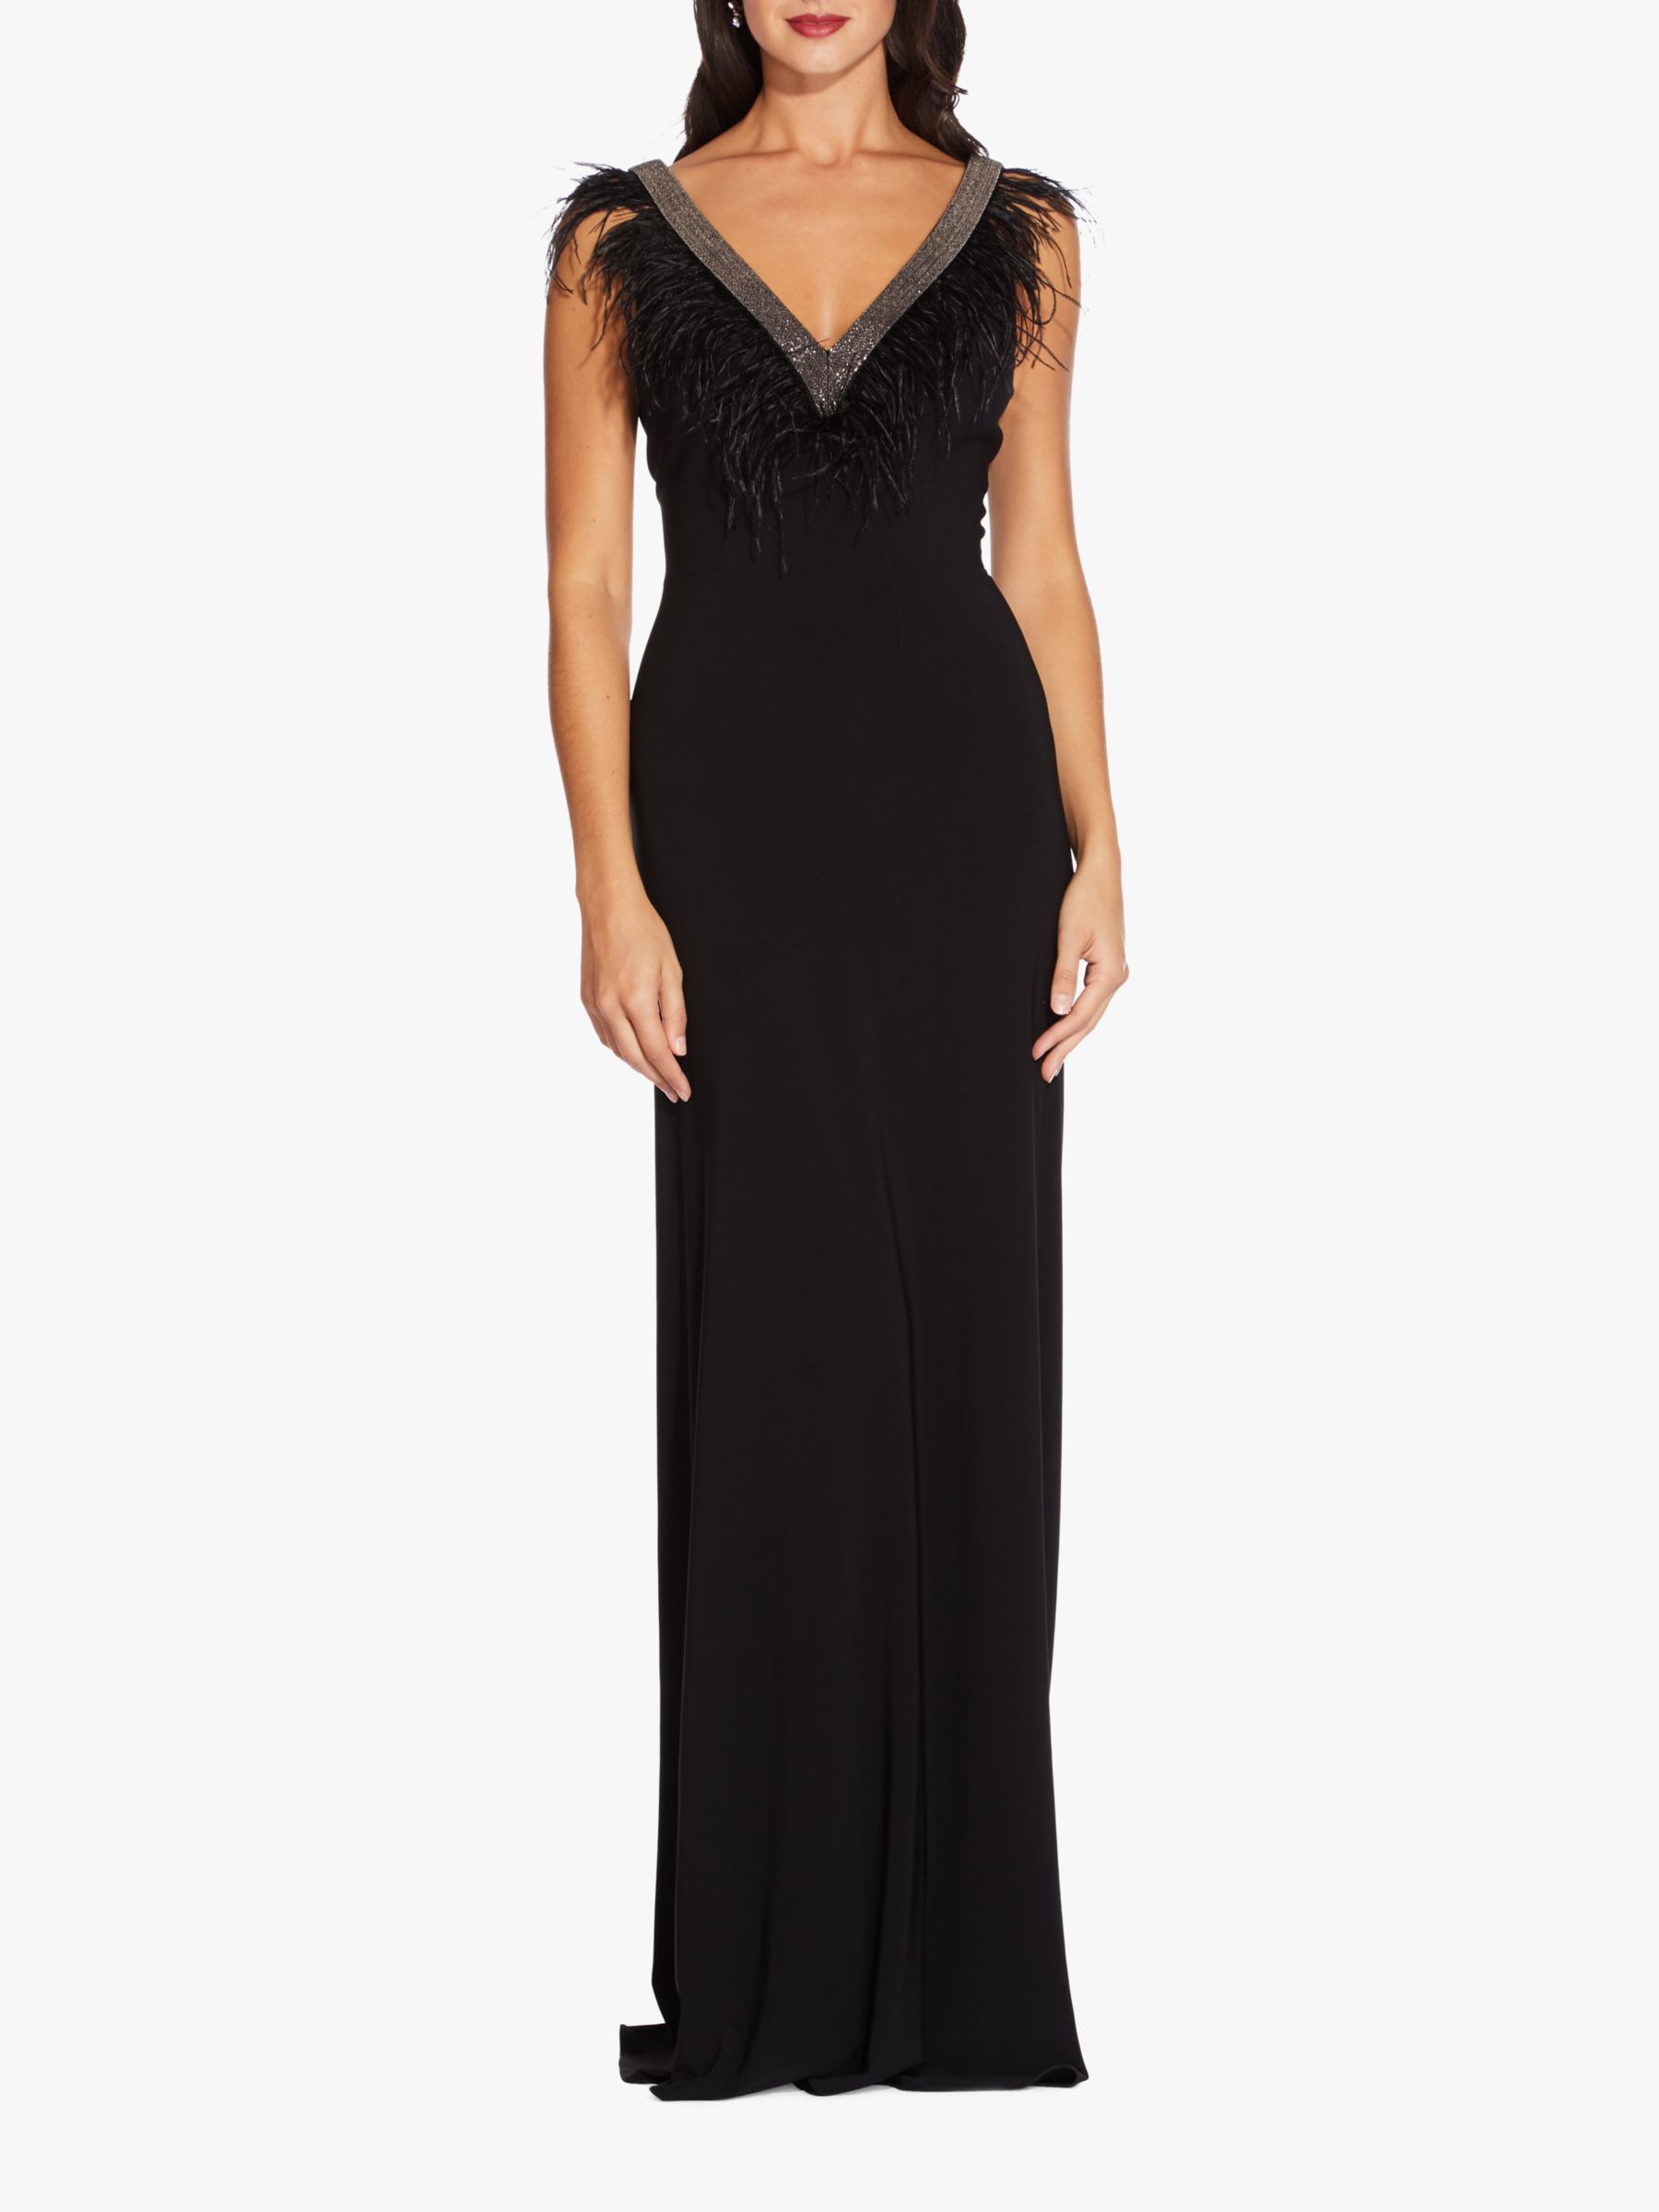 Adrianna Papell Long Feather Jersey Dress, Black at John Lewis & Partners